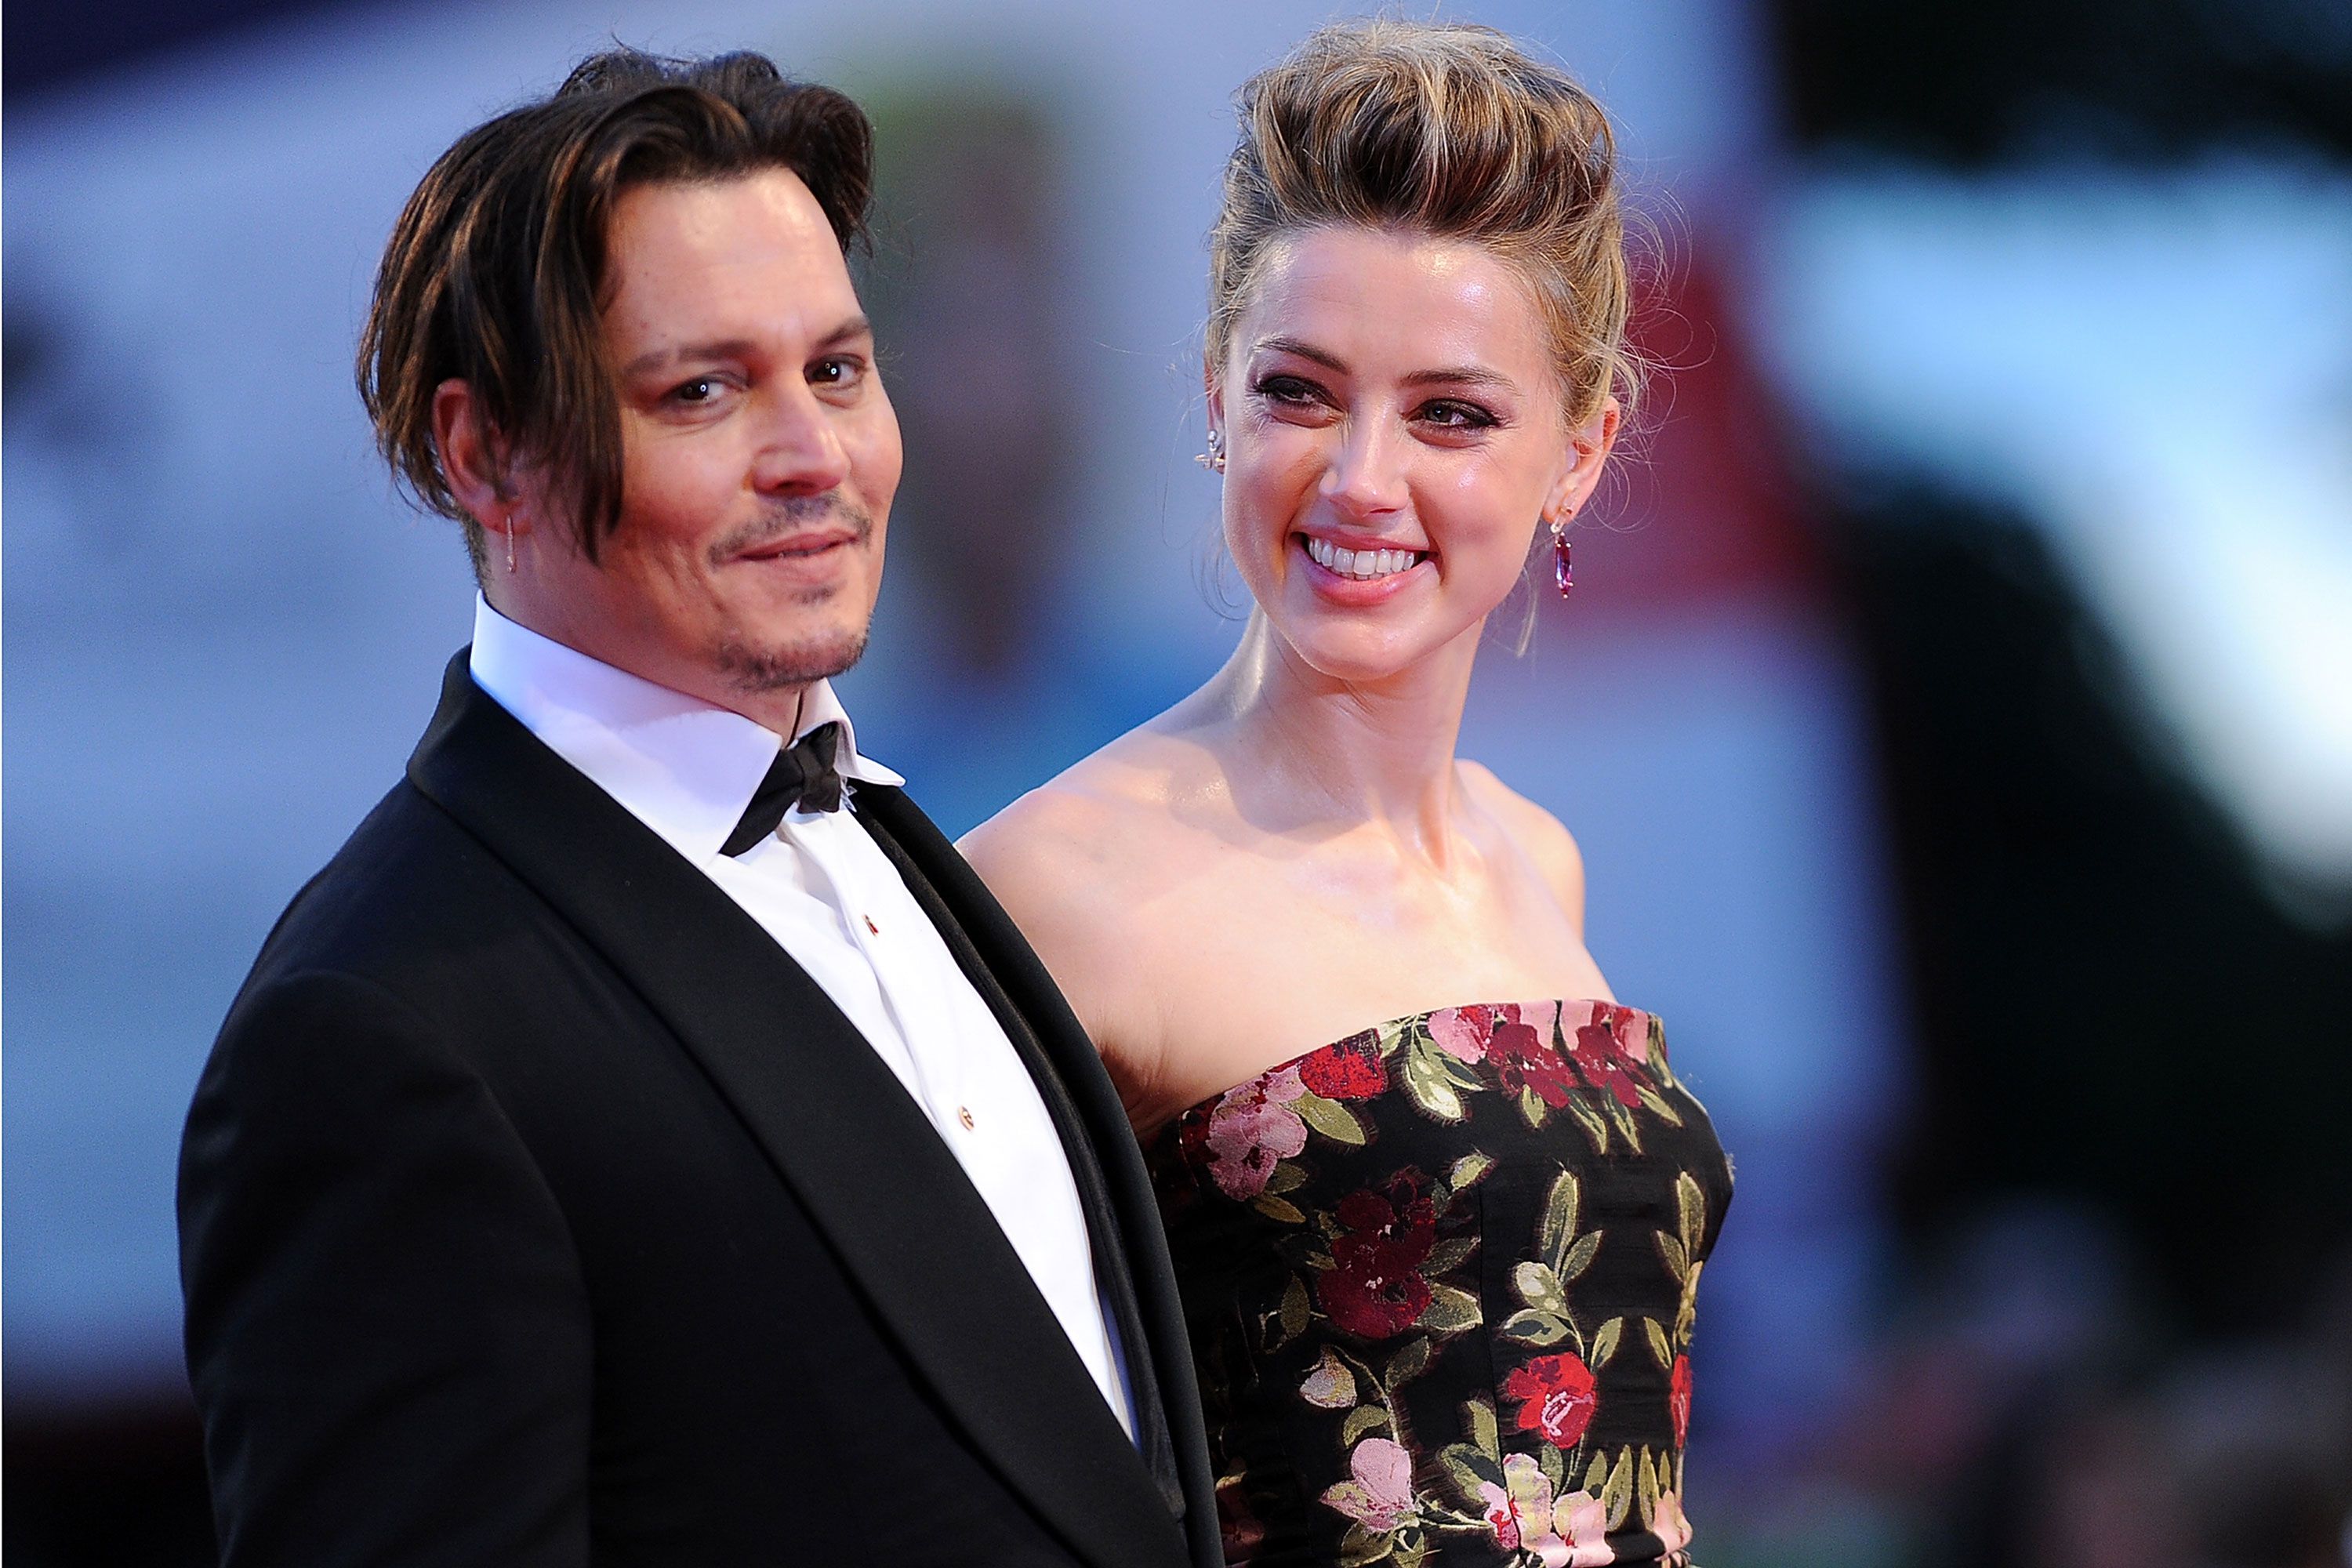 British court throws our Johnny Depp "wife beater" appeal